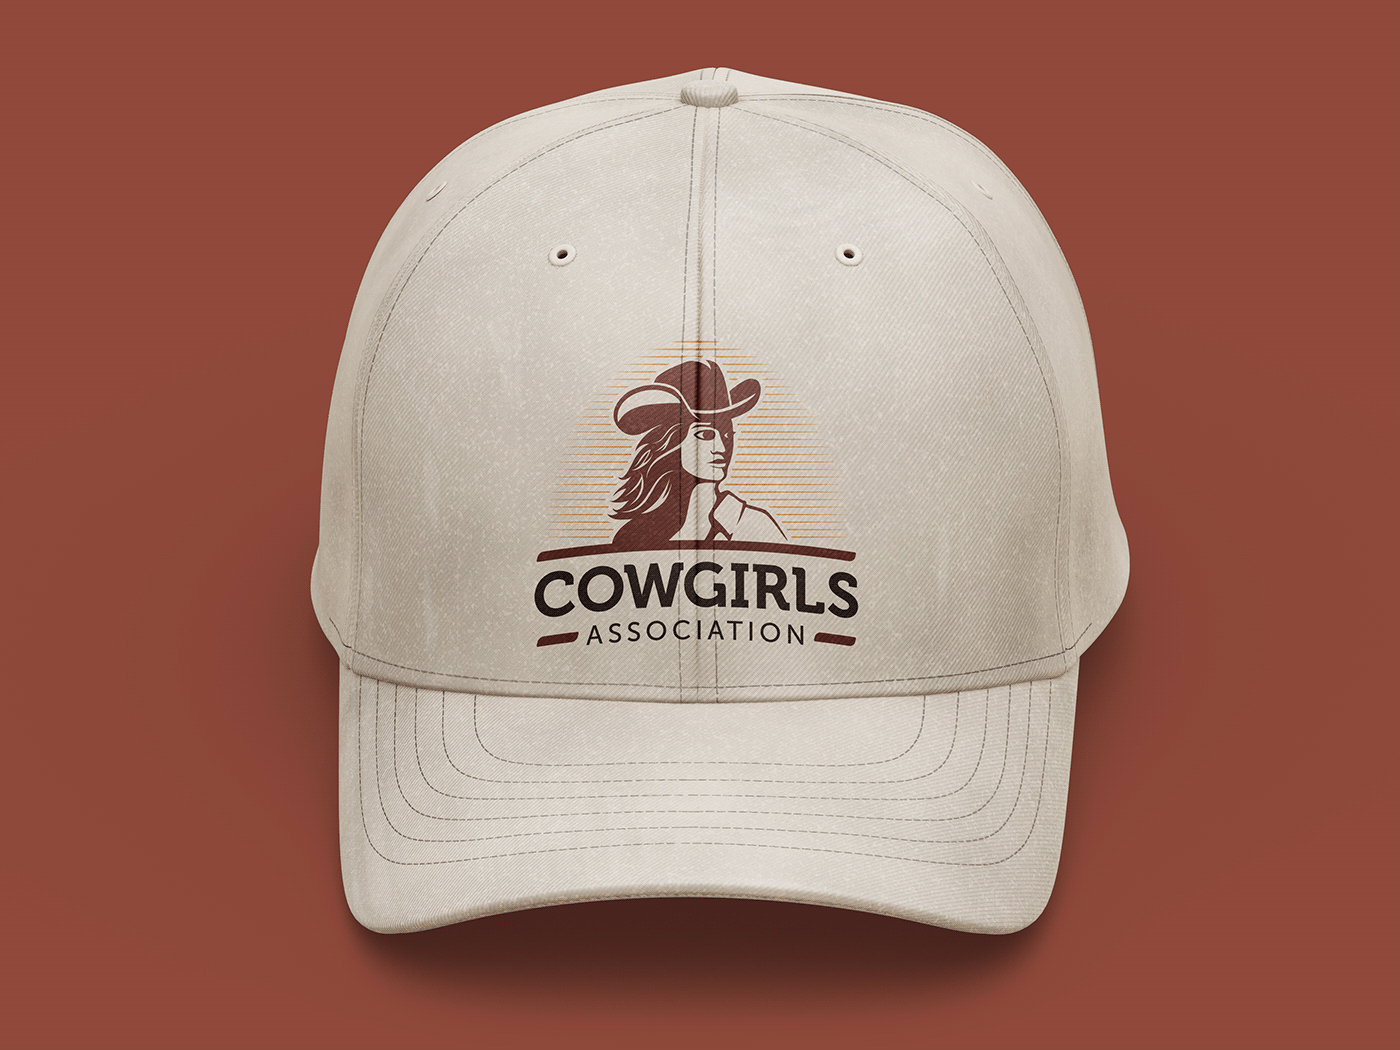 American Culture cowgirls Girl Power logo New Organisation Texas culture update west western Woman Power